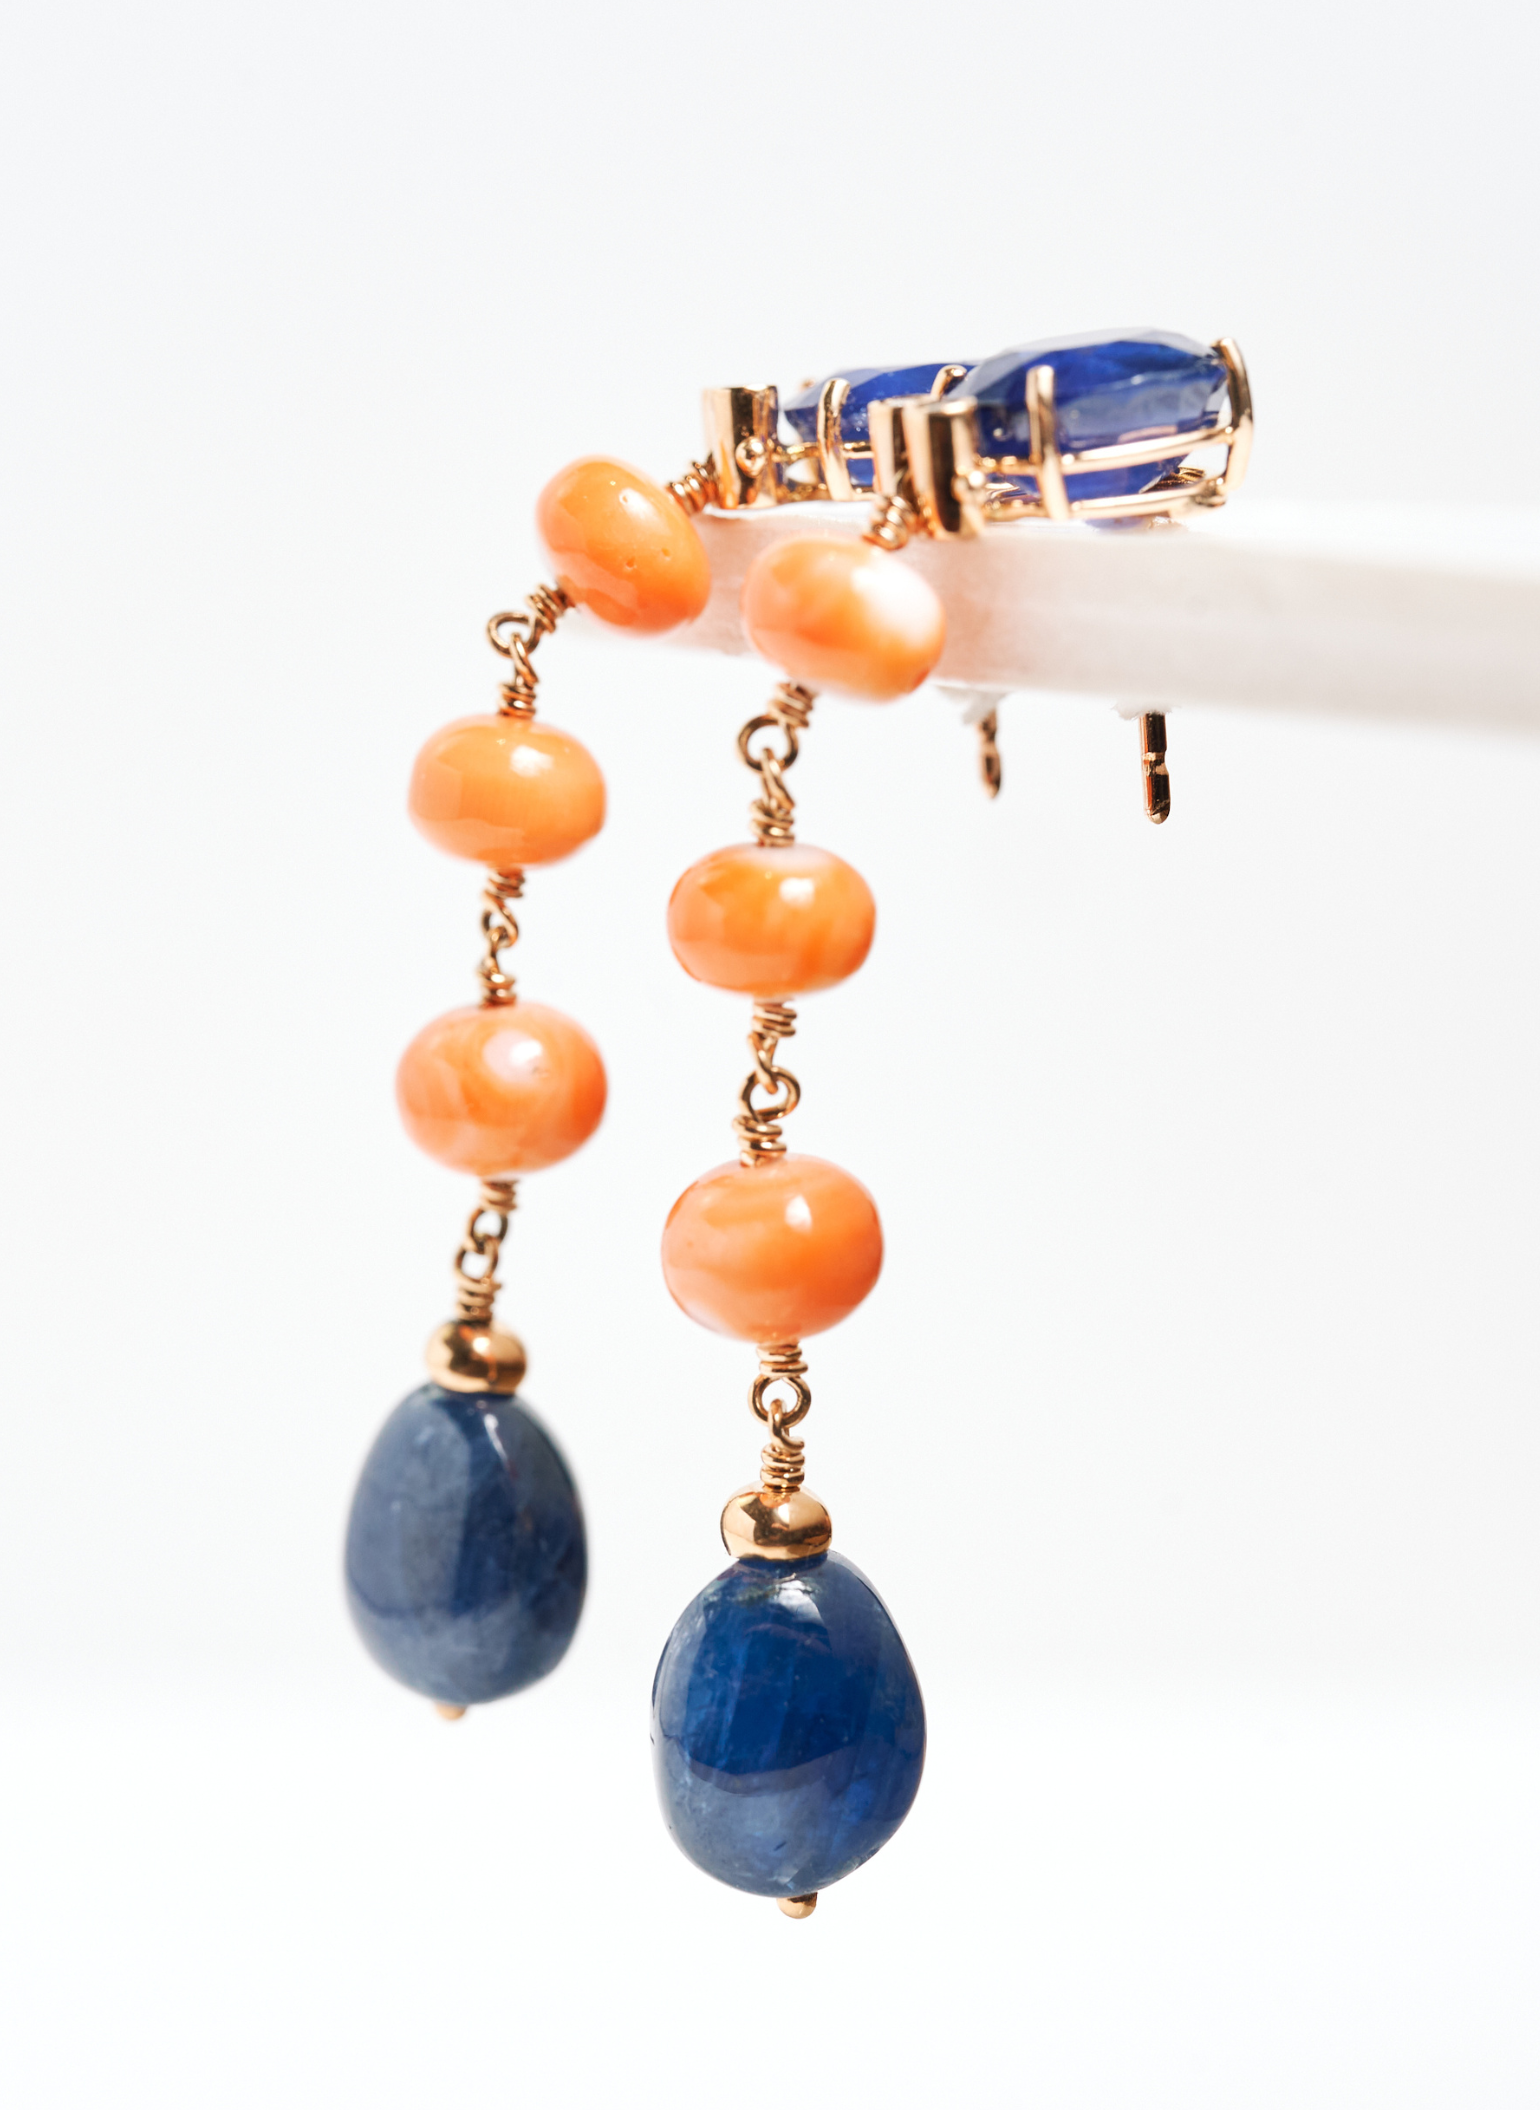 Coral Tribute Earrings with Sapphires